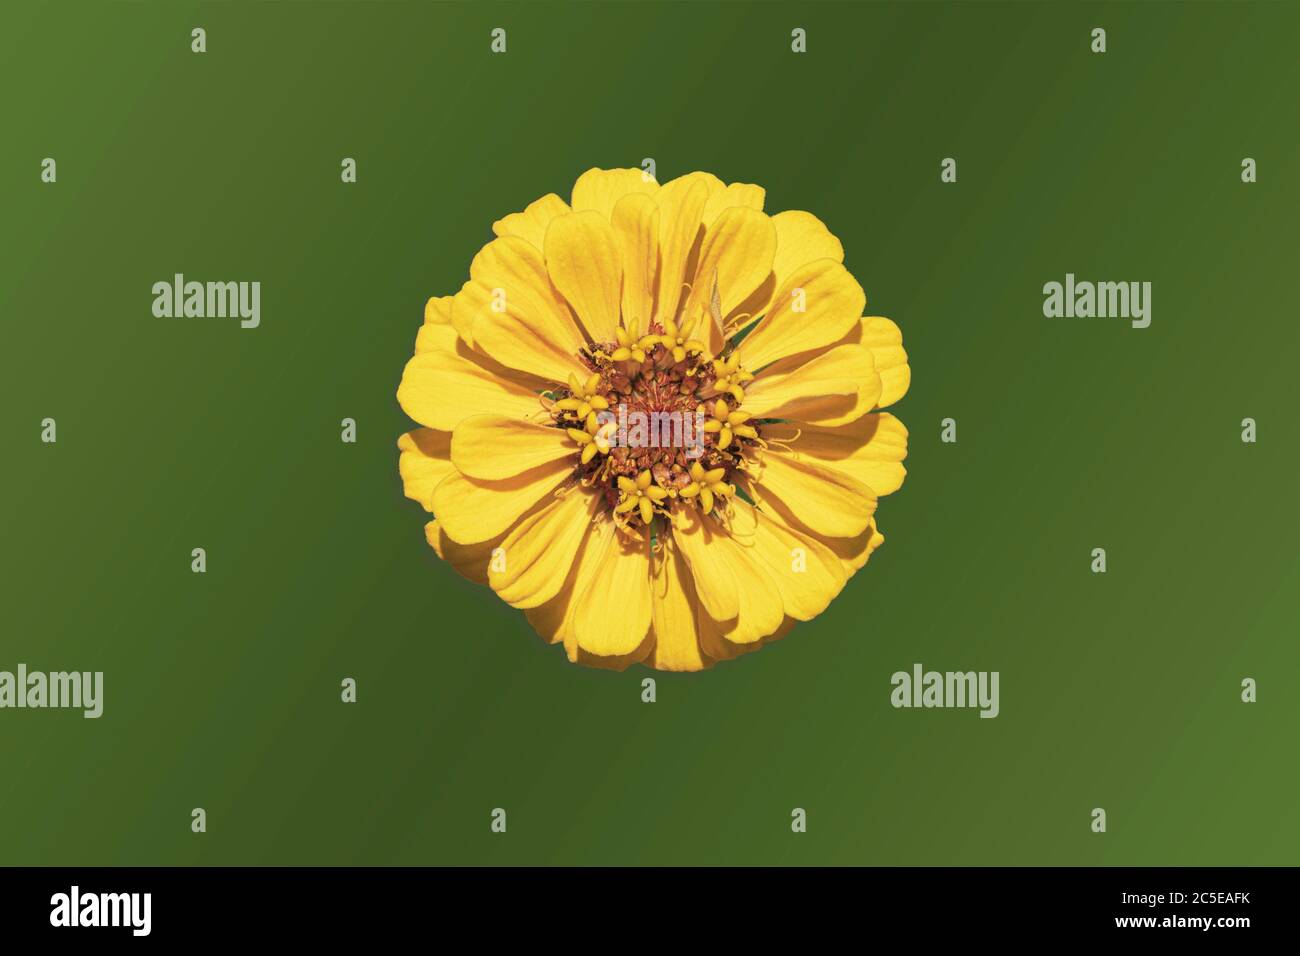 one isolated cut out of a perfect semi-double golden yellow zinnia flower on a green screen blended background Stock Photo